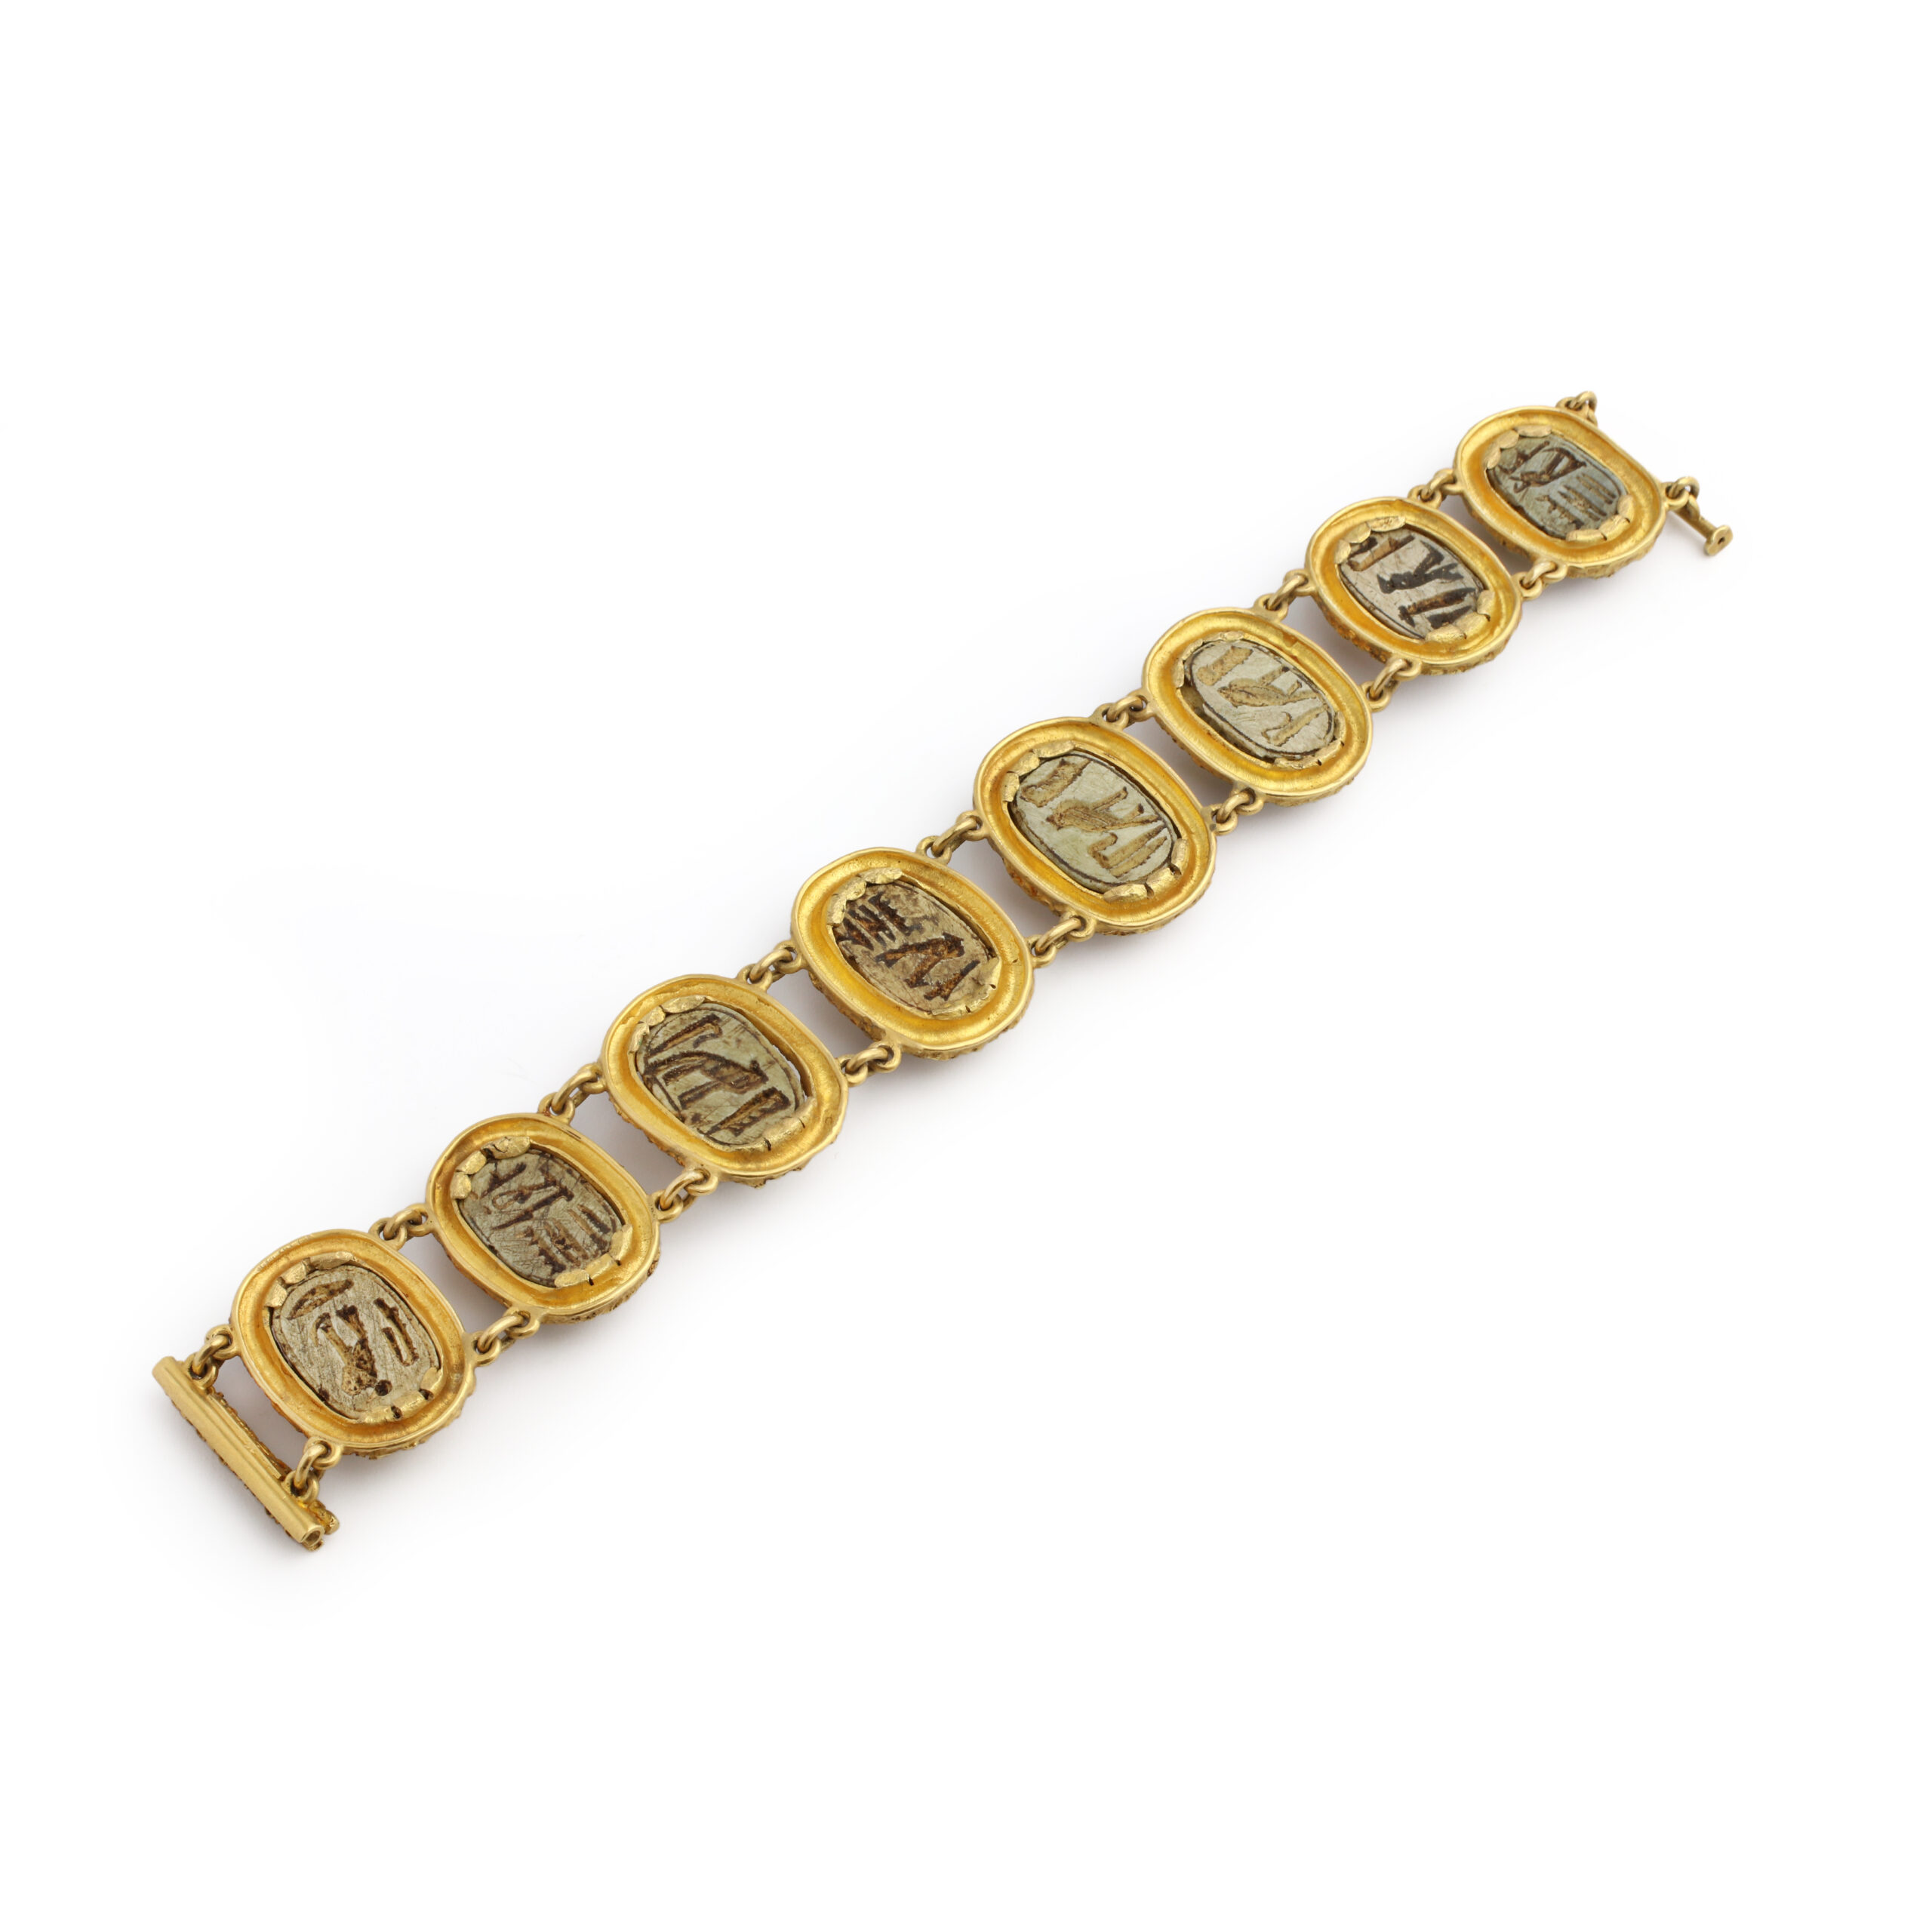 Gold and Antique Hard Stone Scarab Bracelet - FD Gallery